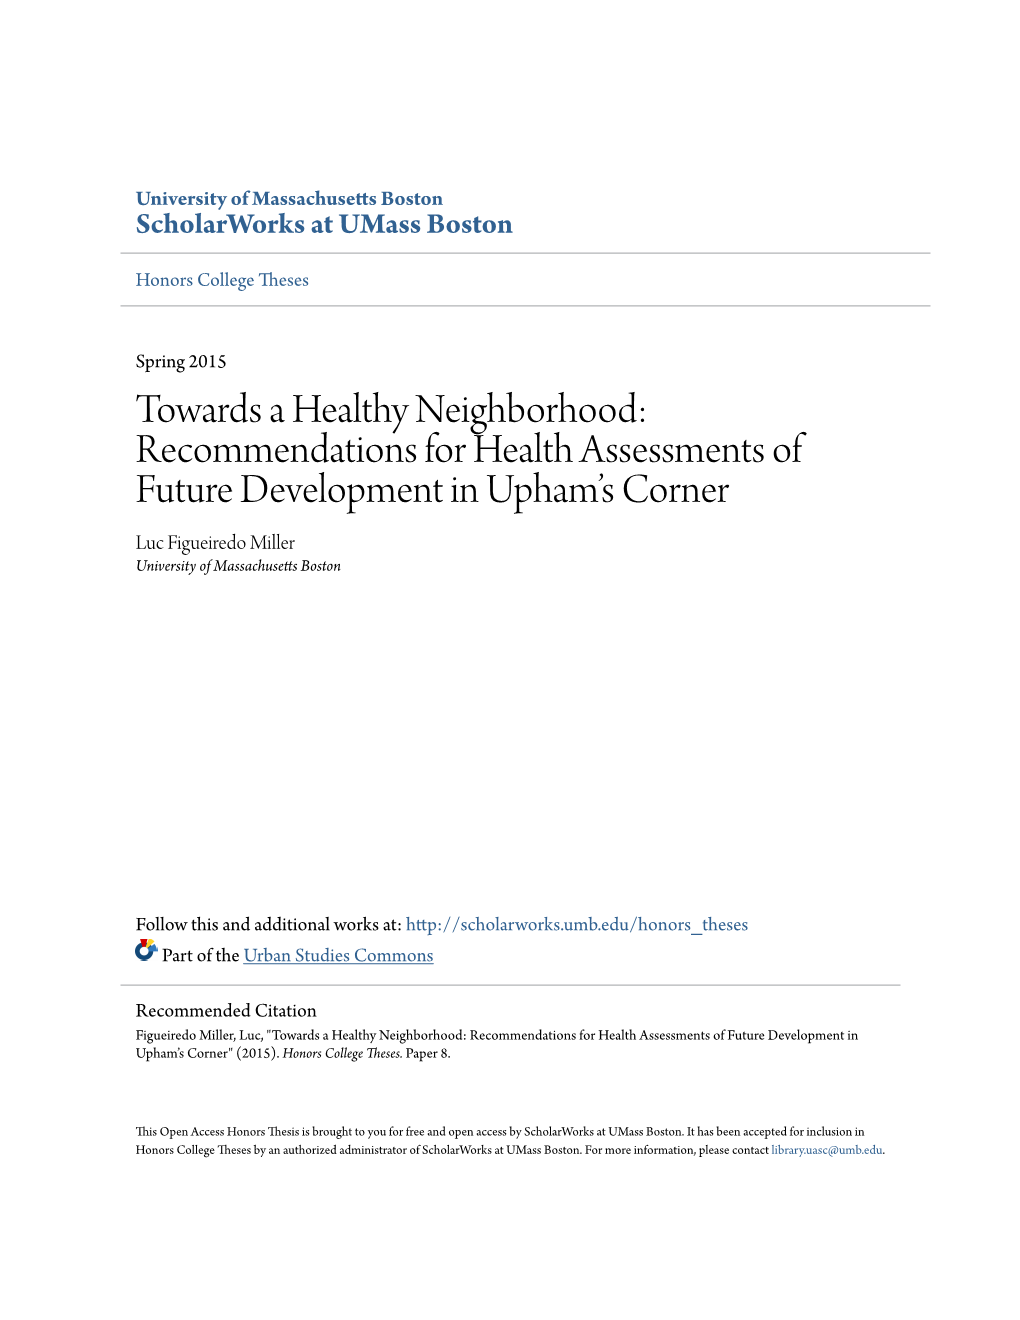 Towards a Healthy Neighborhood: Recommendations for Health